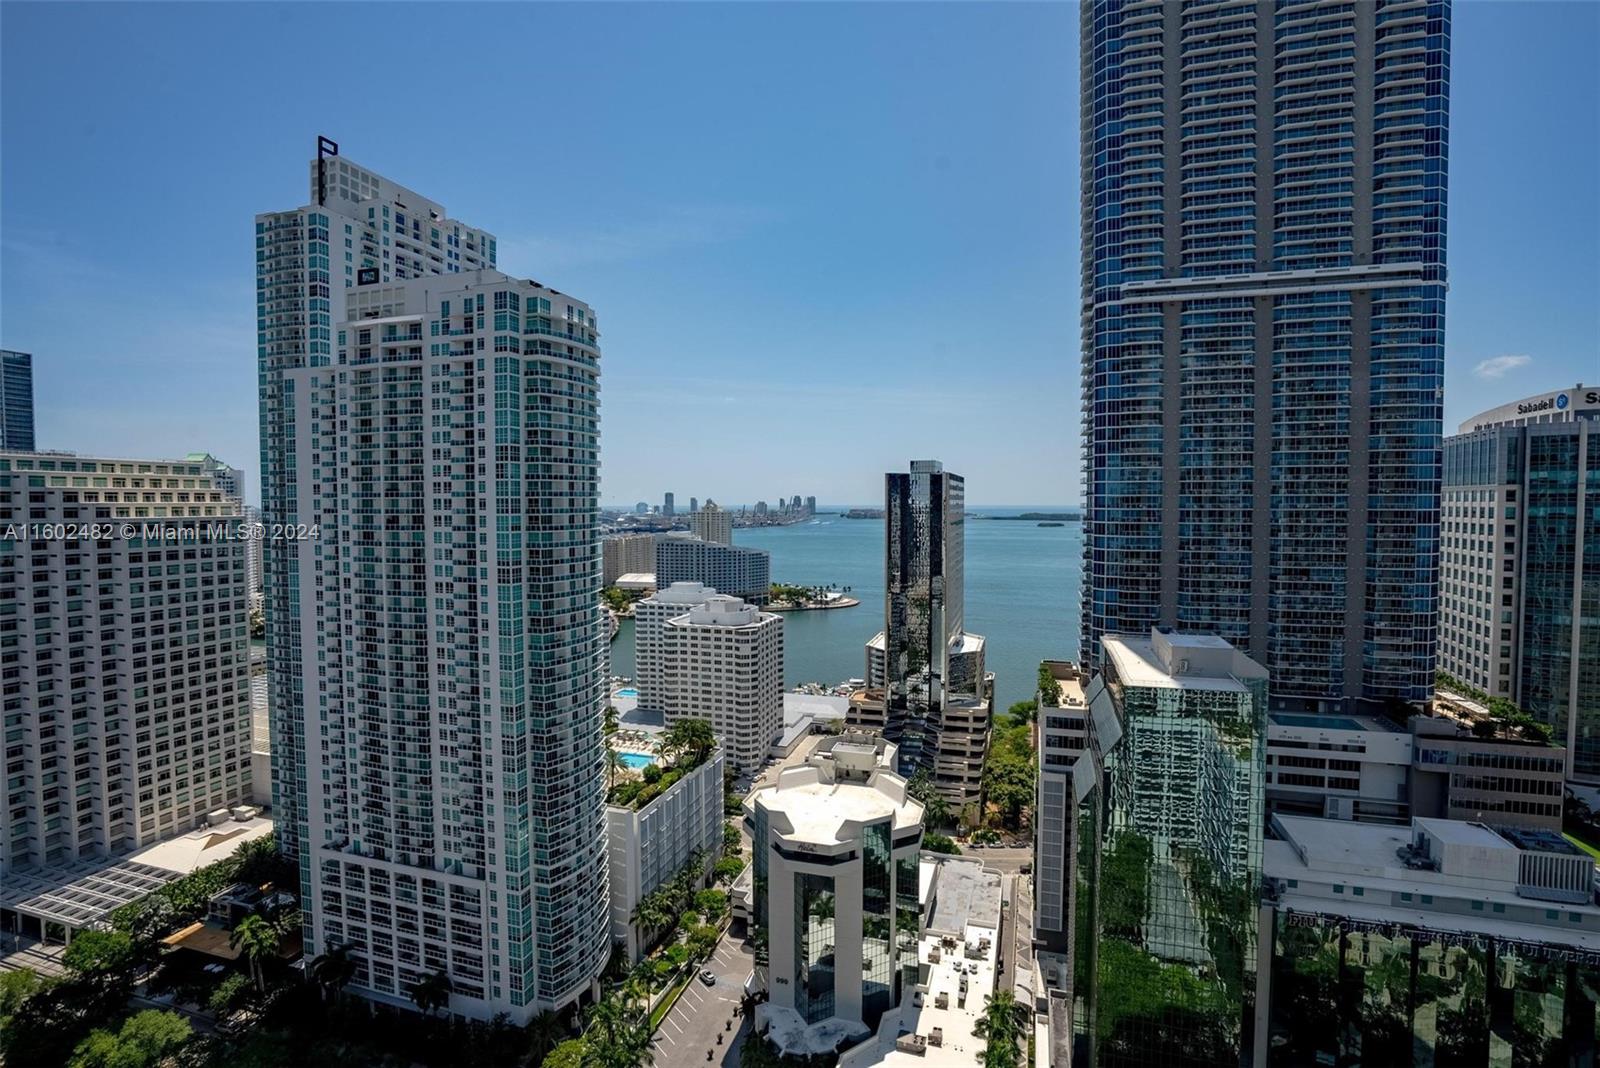 Luxuriously UPGRADED unit at the top-of-the line; 1010 Brickell. Featuring 2 beds, 3 baths + DEN, which can be easily converted into a 3rd bedroom, porcelain tiles, 2 parking spaces & 1 STORAGE SPACE, Electric window treatments, 9-foot ceiling heights, LARGE BALCONY W/SPECTACULAR VIEWS OF THE BRICKELL skyline and BAY, PRIVATE ELEVATOR! Enjoy your life in this luxury building with an outdoor movie theatre, restaurant & swimming pool at 50th floor rooftop; Co-ed Hammam spa w/ cold & hot Jacuzzi, massage & treatment rooms, sauna & steam room, basketball & squash courts, indoor heated swimming pool, fitness center, yoga room, running track, indoor kids playground, party room, kids room w/bowling, virtual golf simulator. Excellent location next to Publix, Brickell City Center and more!